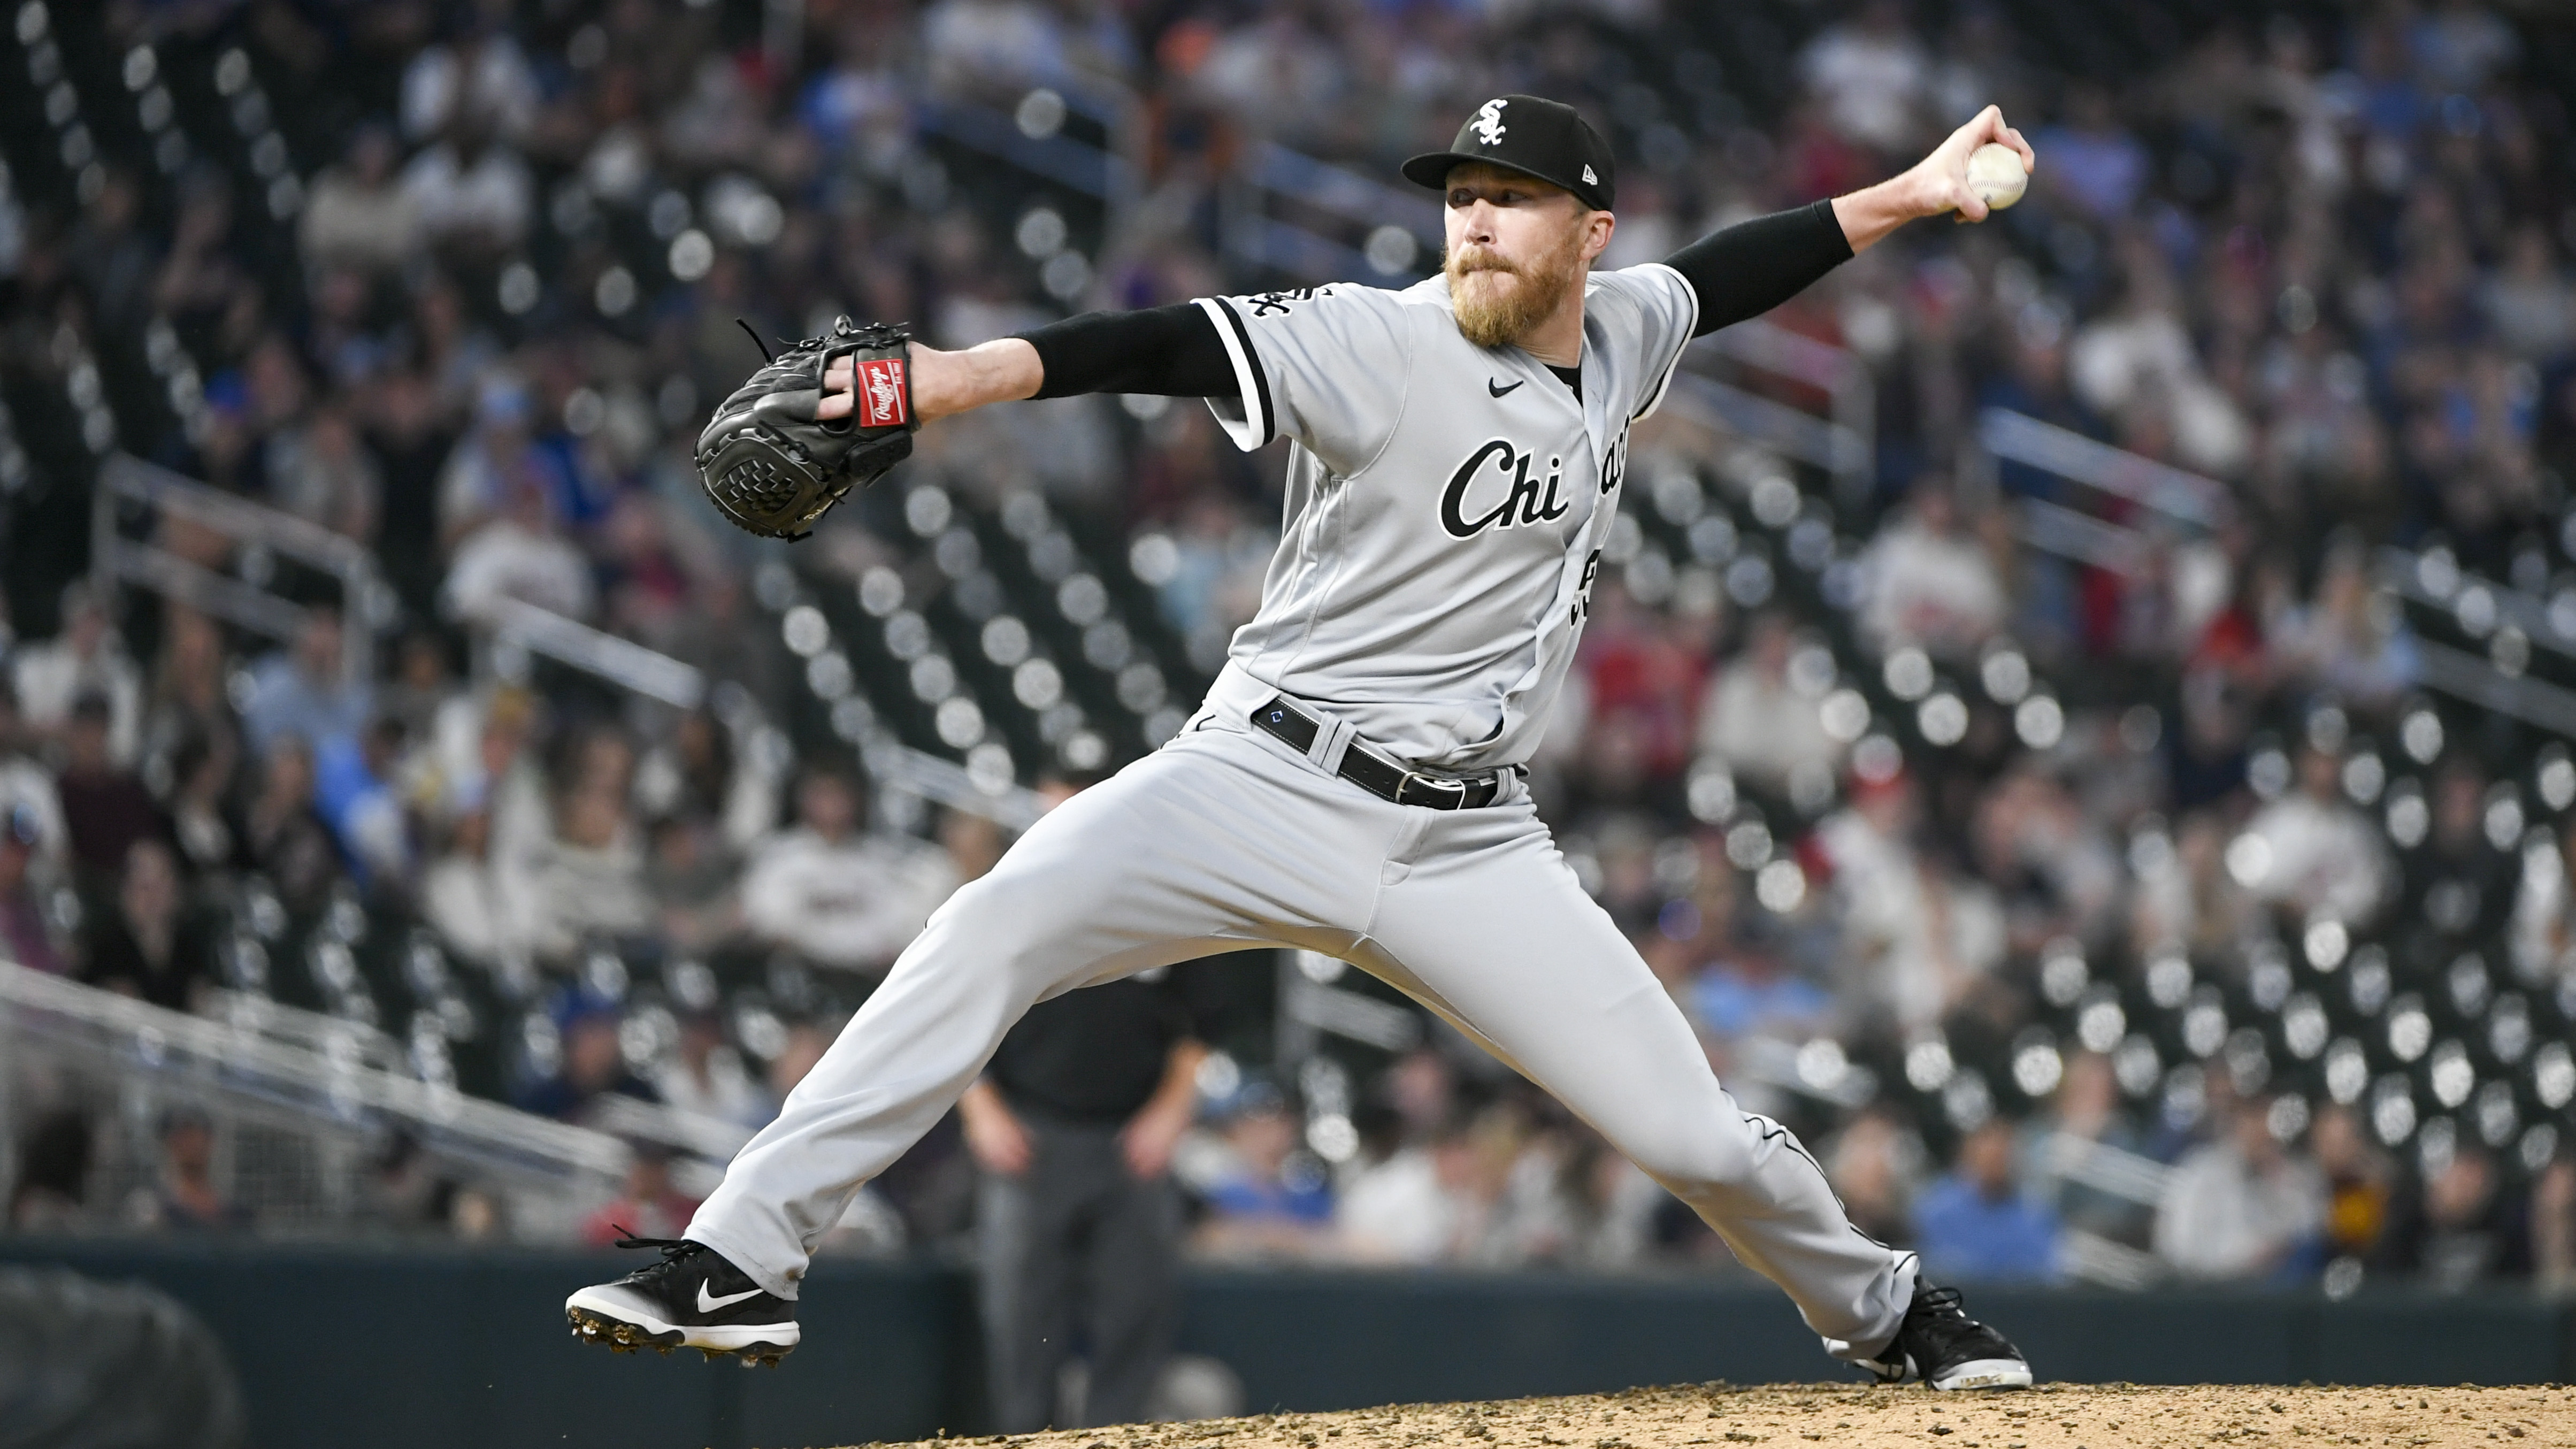 White Sox acquire lefty reliever Diekman from Red Sox